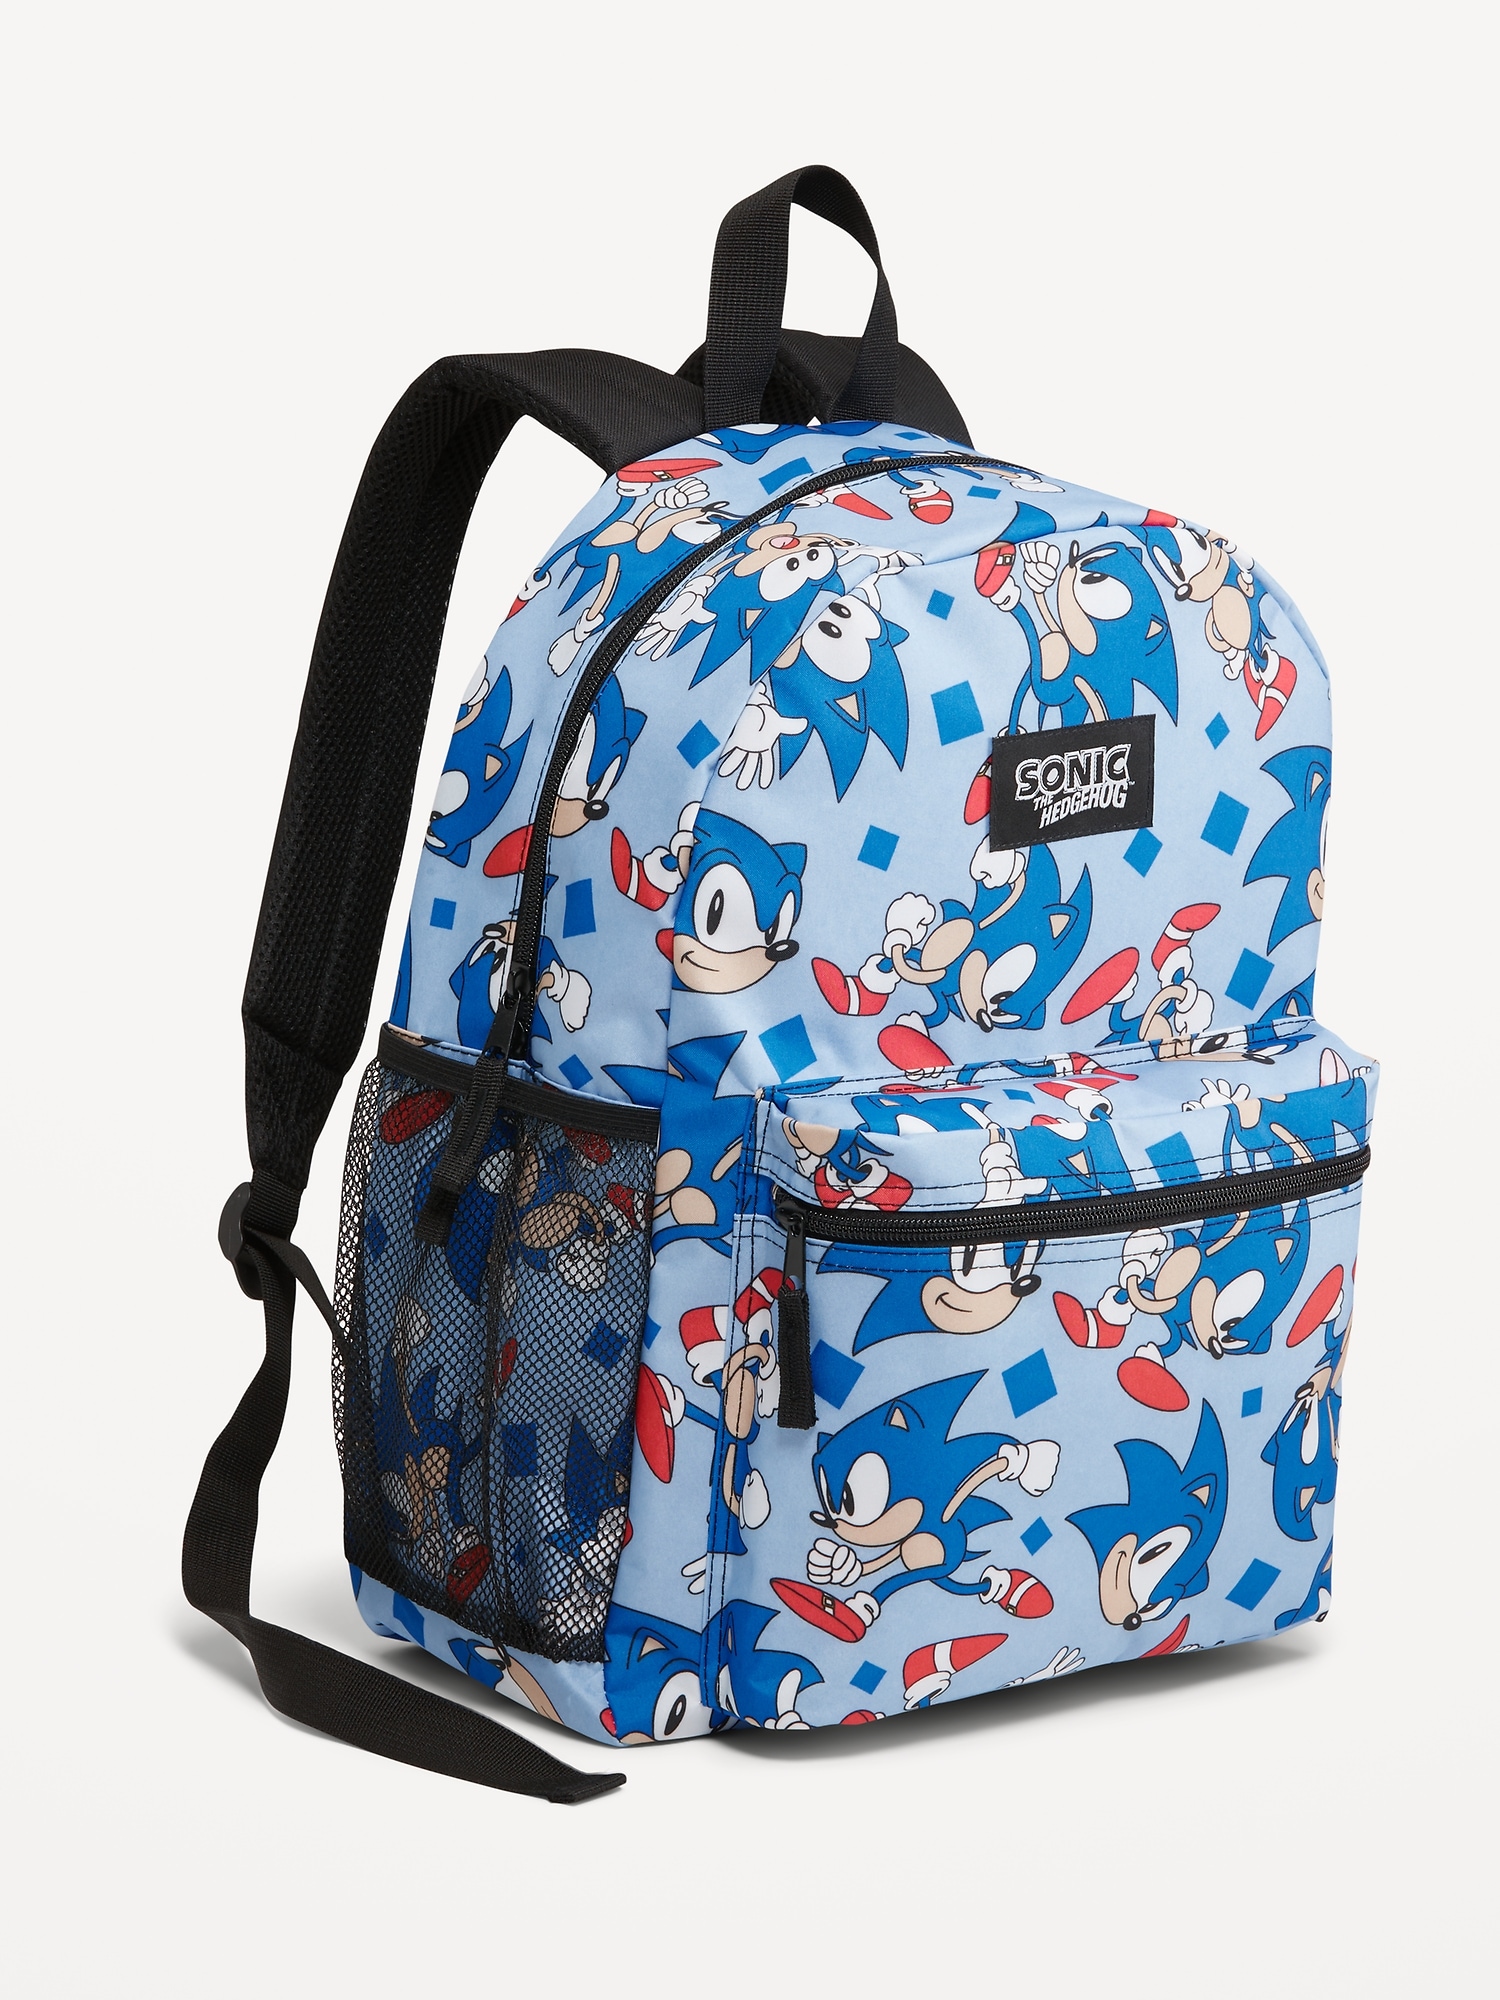 Sonic The Hedgehog™ Canvas Backpack for Kids